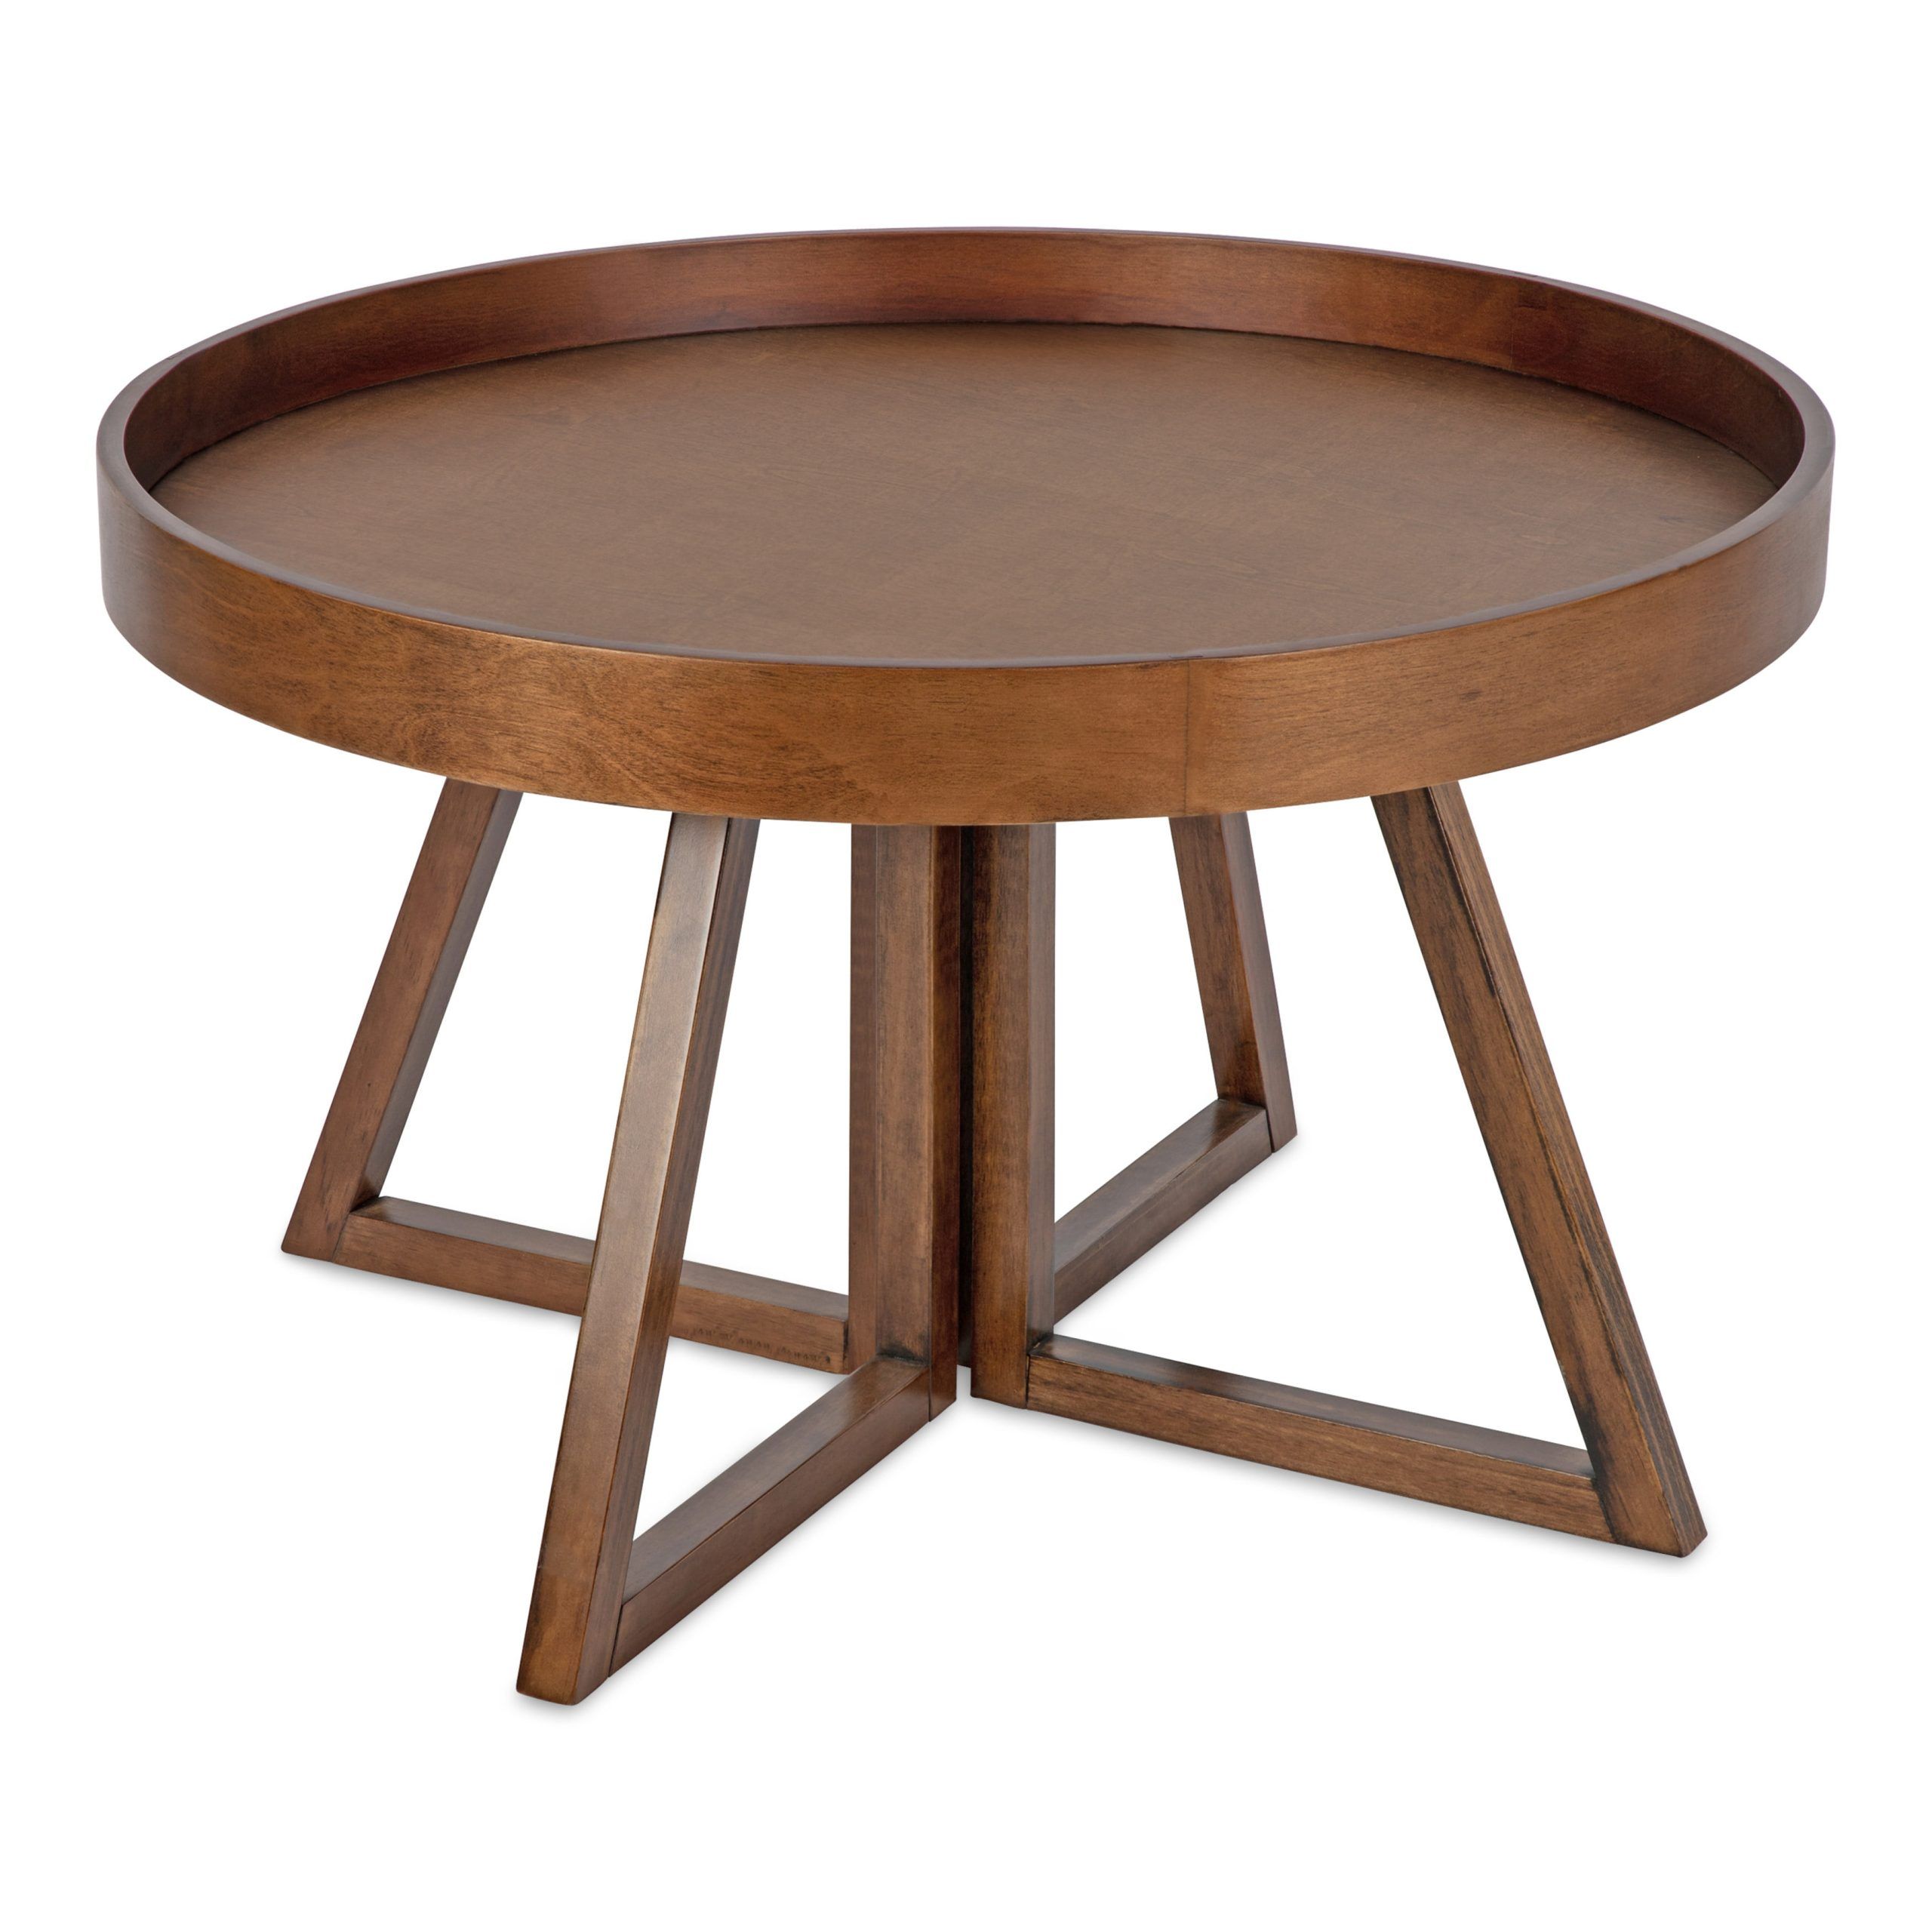 Kate And Laurel Avery Modern Round Coffee Table, 30" X 30" X 18 Intended For Coffee Tables For 4 6 People (Gallery 6 of 20)